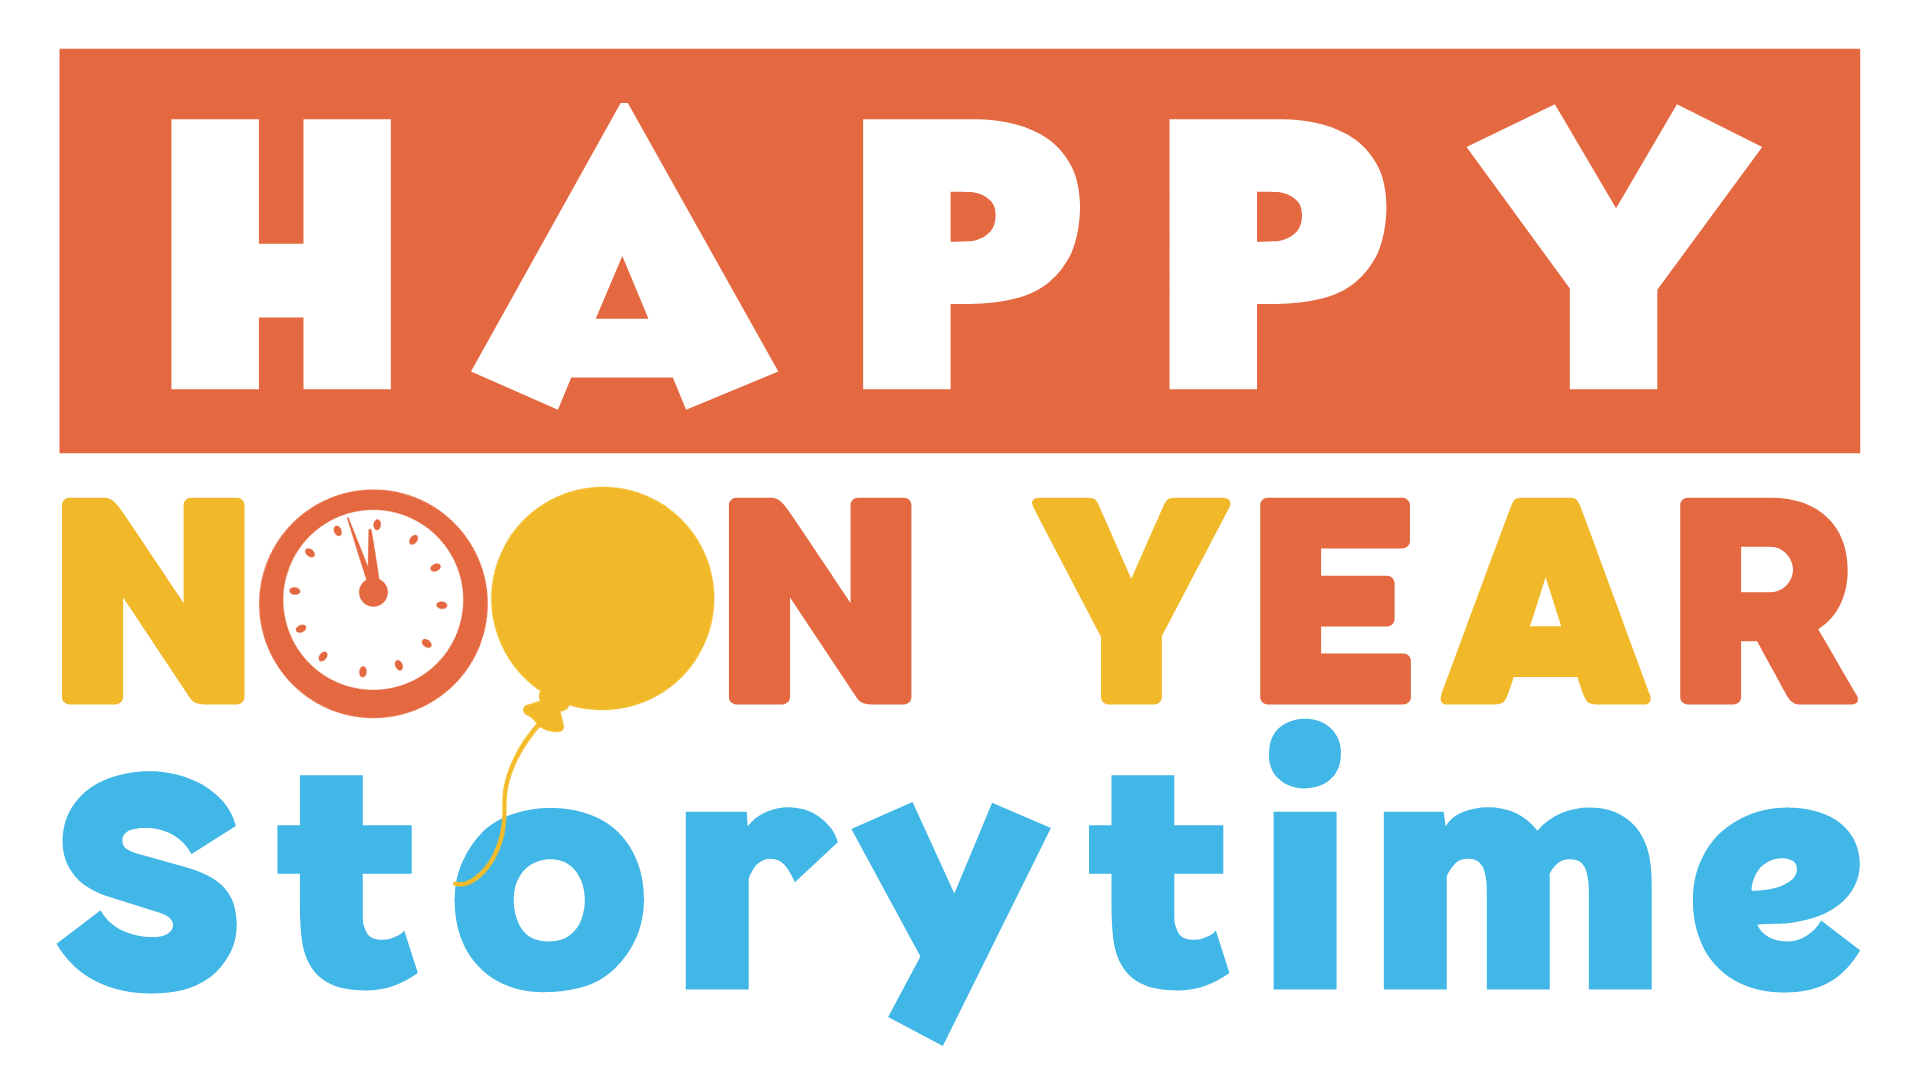 Happy Noon Year Storytime in orange, yellow and blue